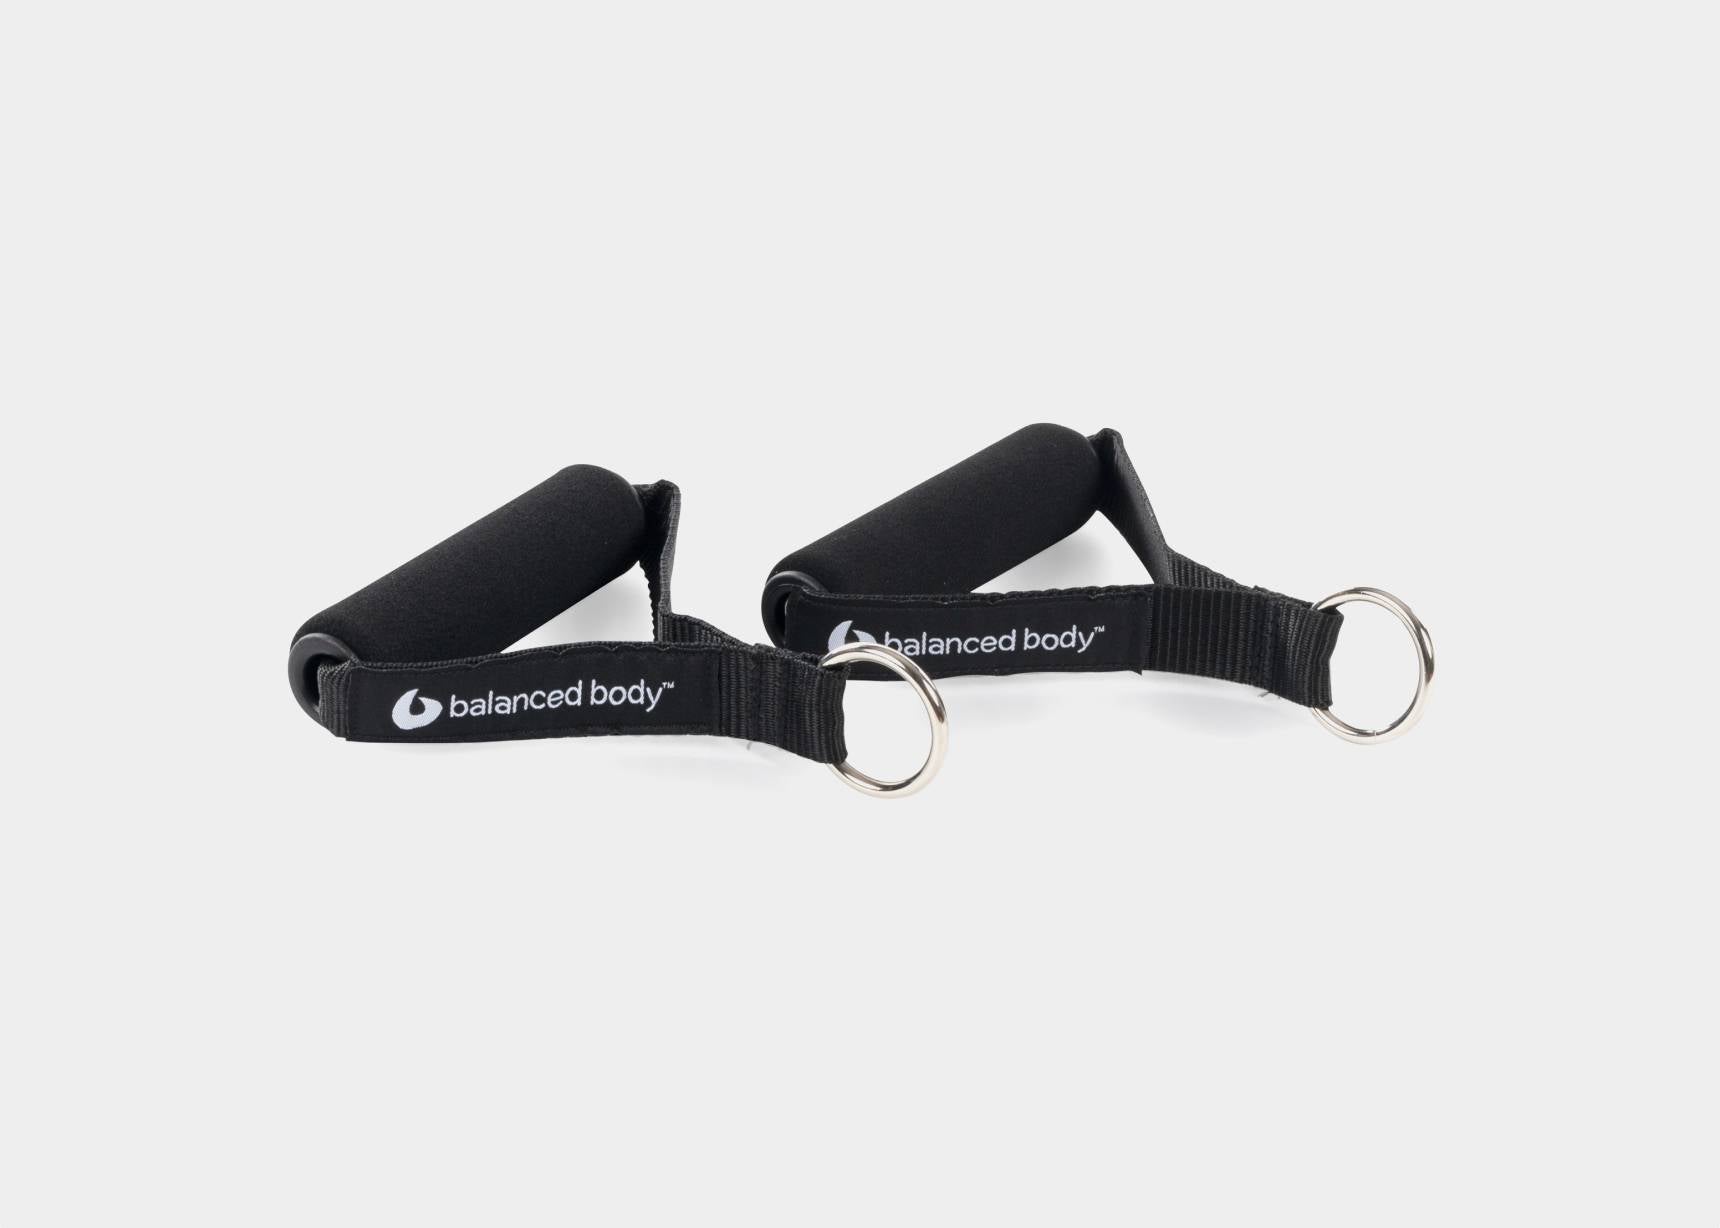 Black Polypro Neoprene handles for comfortable and secure grip.